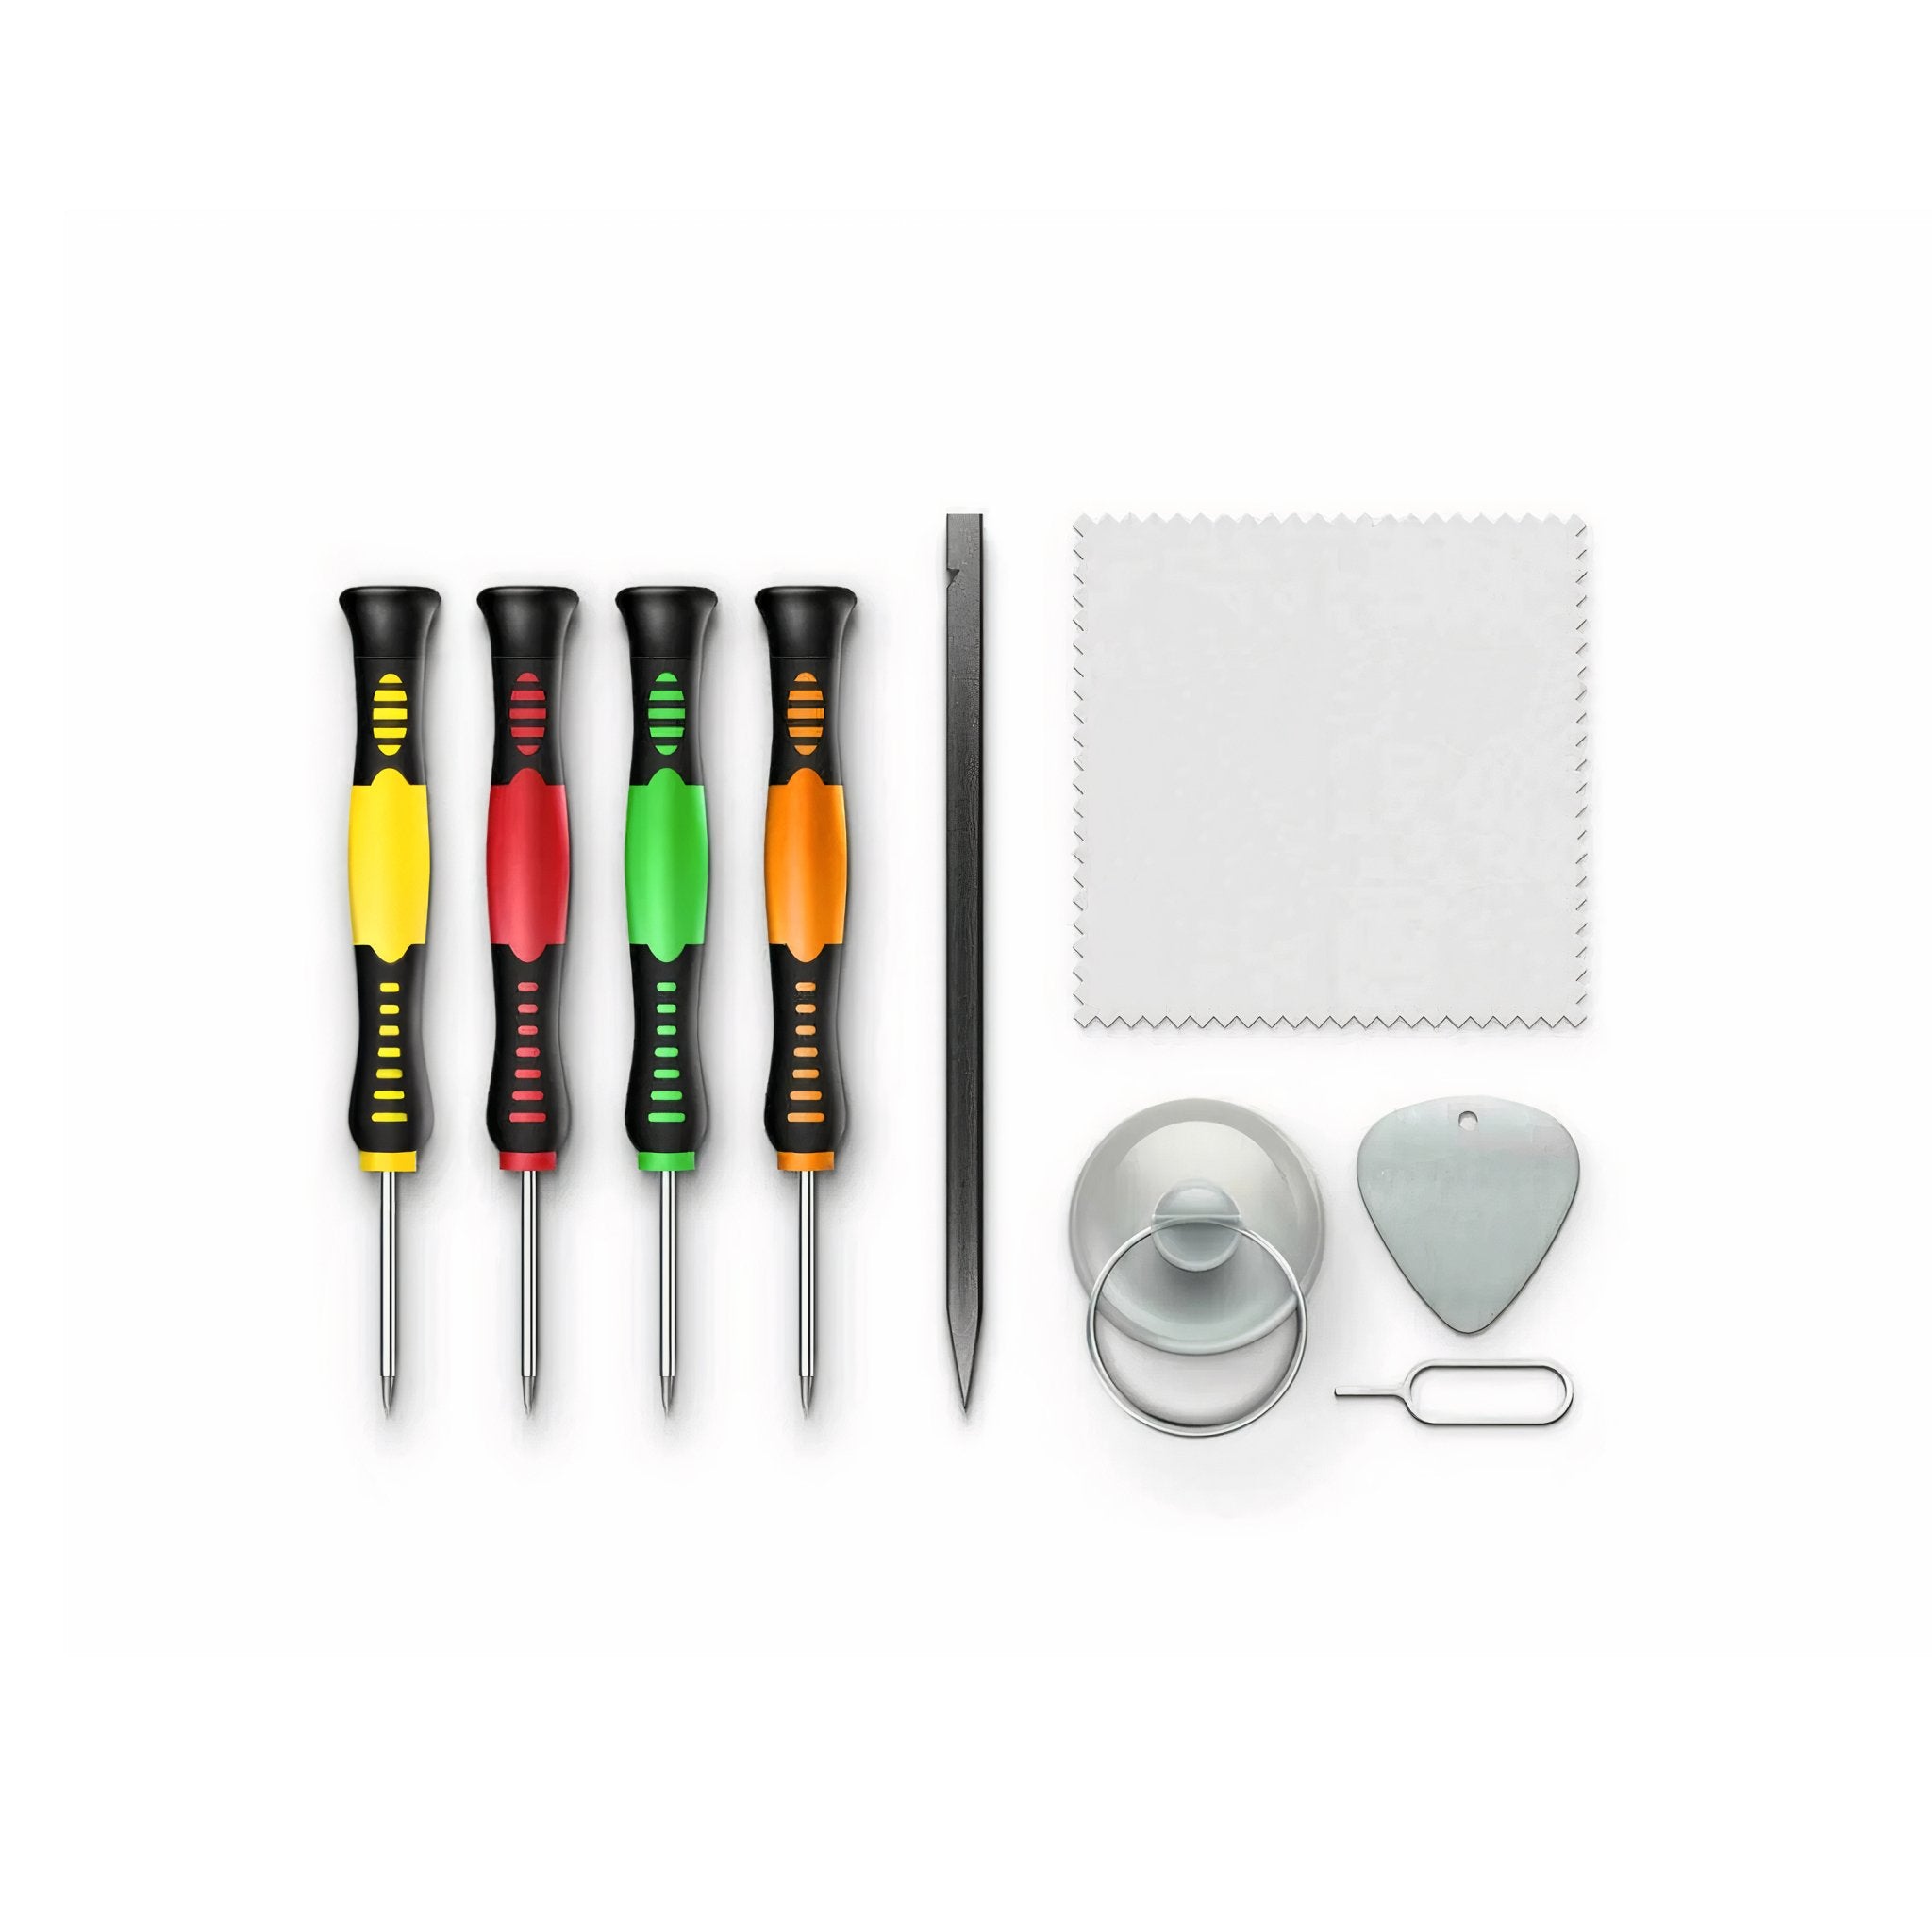 iPhone XR Screen Replacement Kit - FixProvider